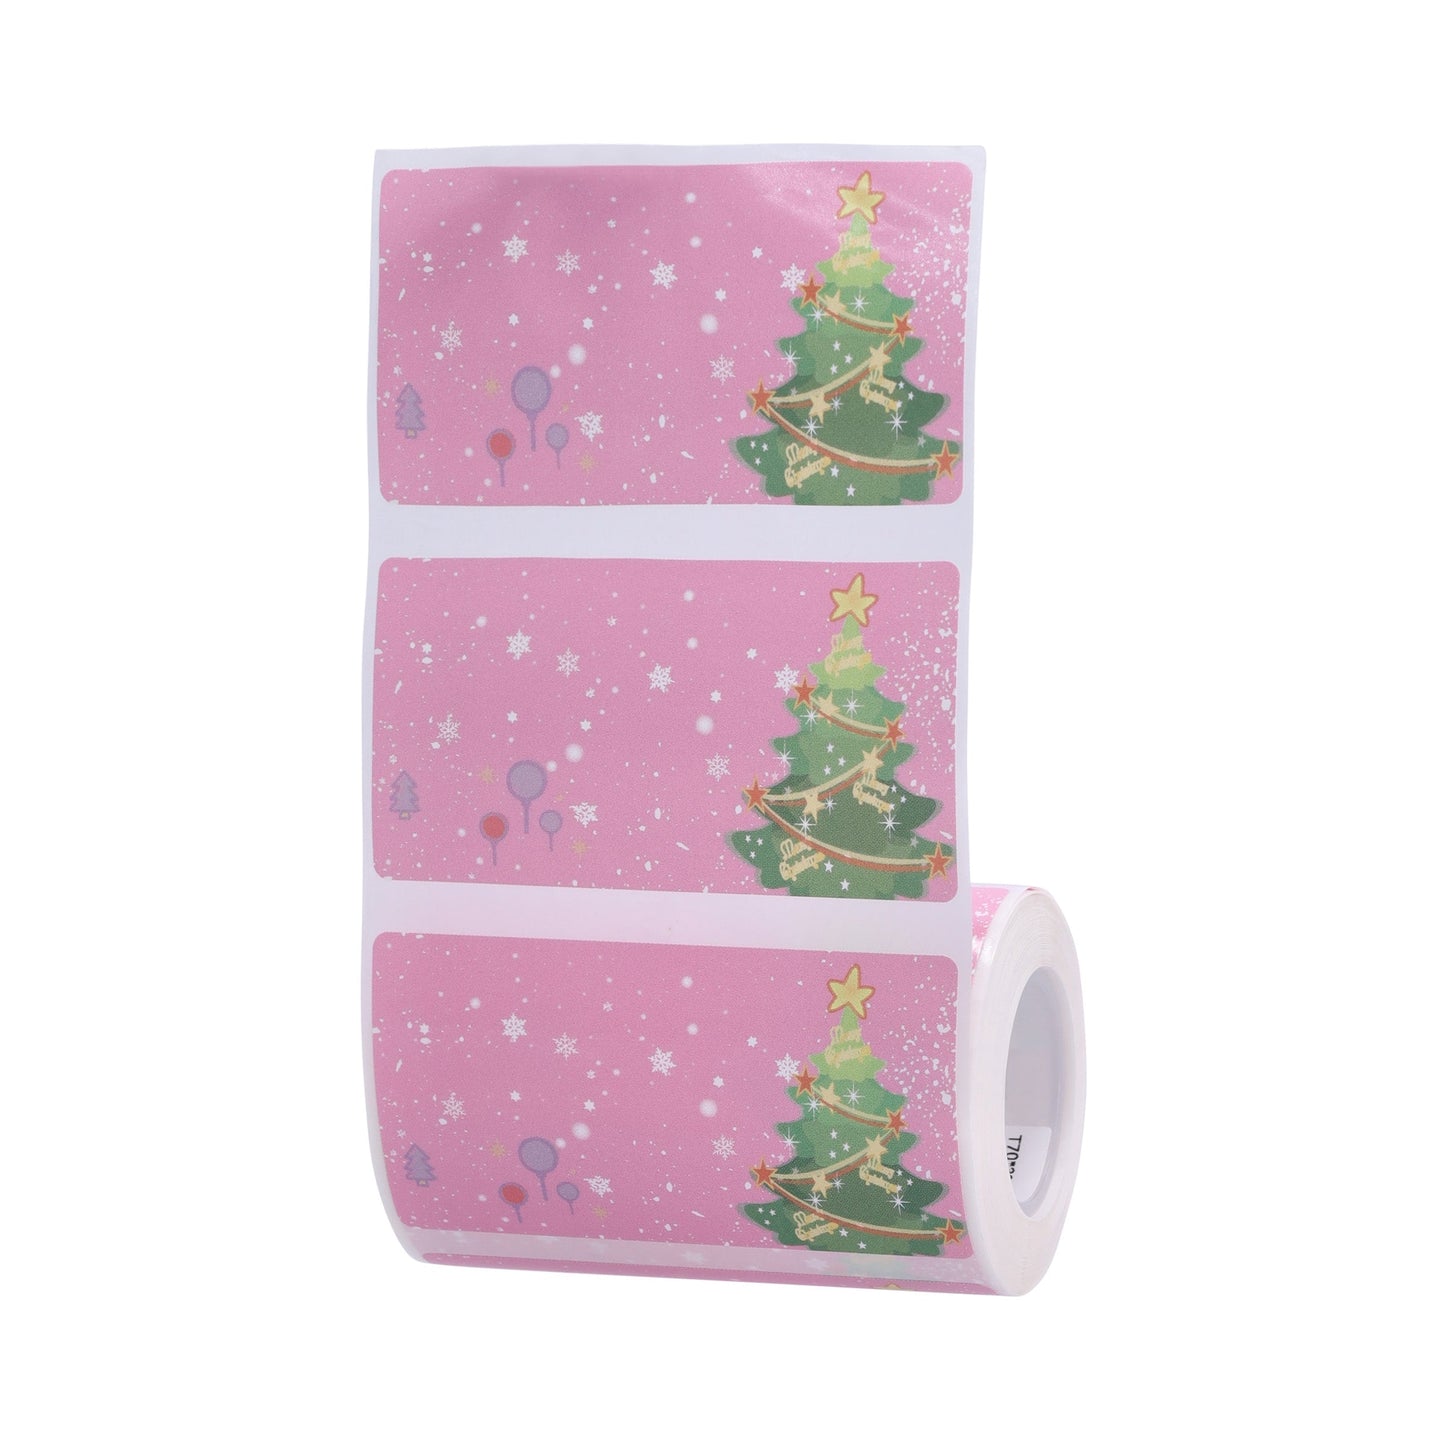 NIIMBOT - B3S ONLY - 70*38MM - 180 LABELS PER ROLL - CHRISTMAS TREE